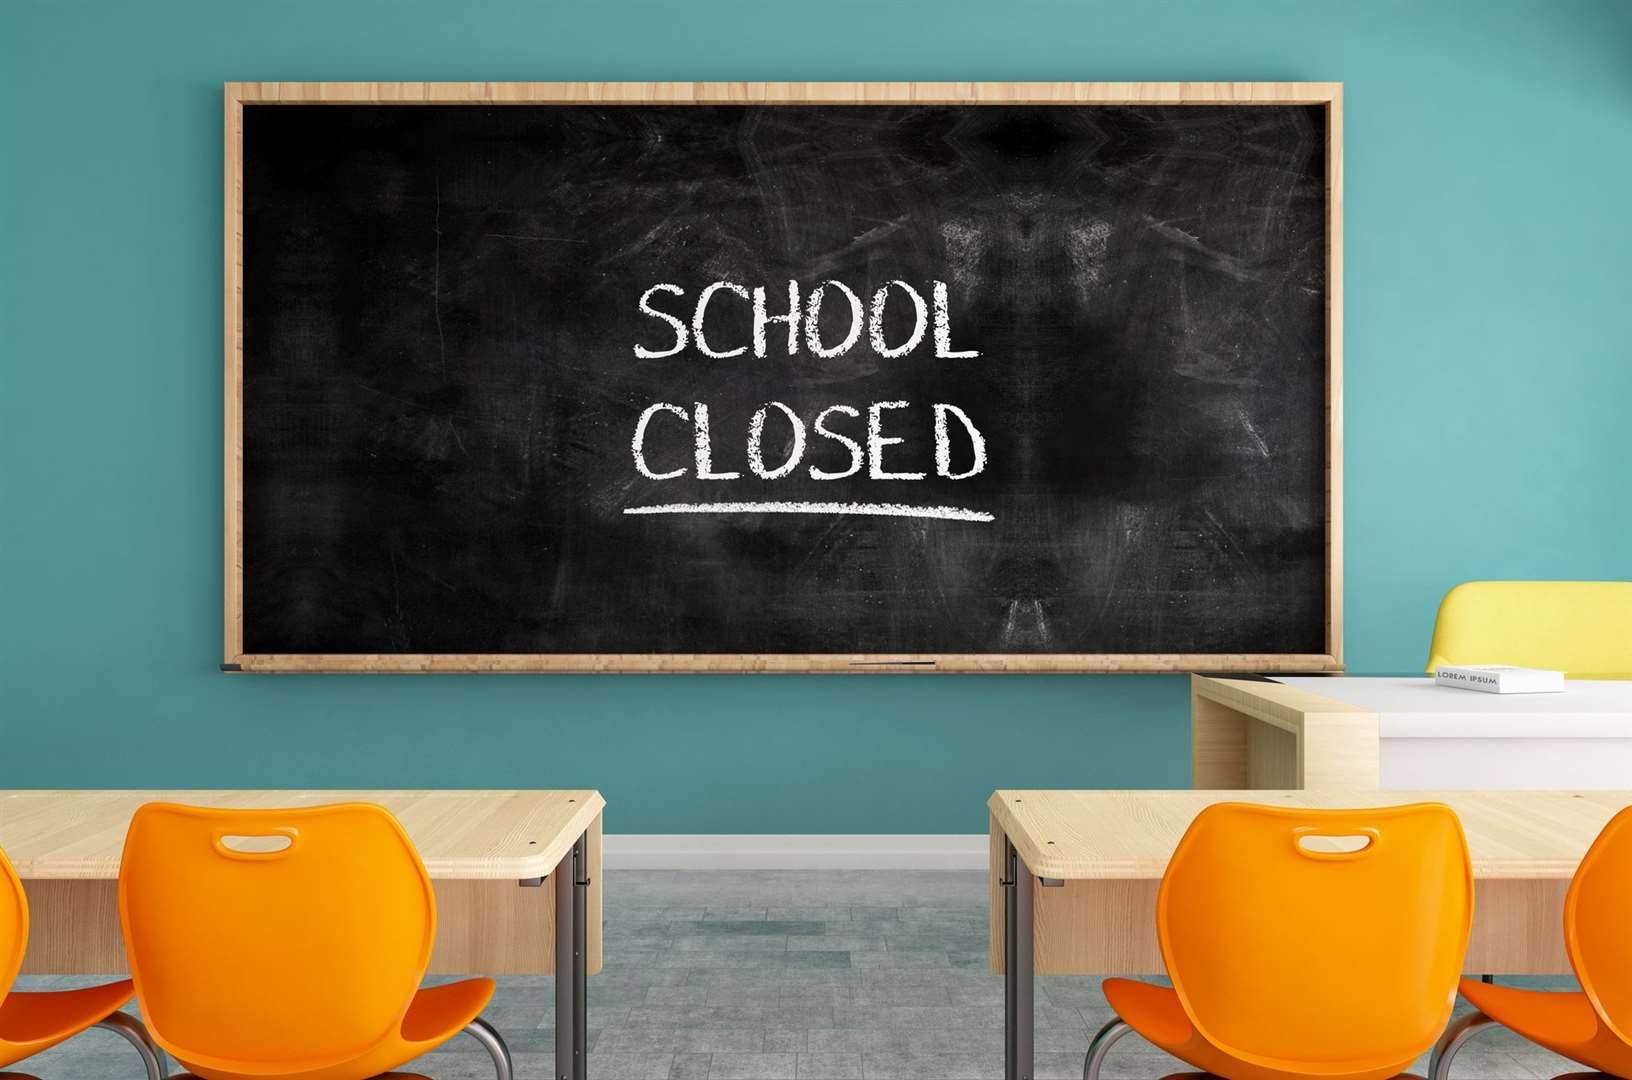 After lockdown, teacher strikes, and extra bank holidays for national events has society’s approach to missing school changed? Picture: iStock.